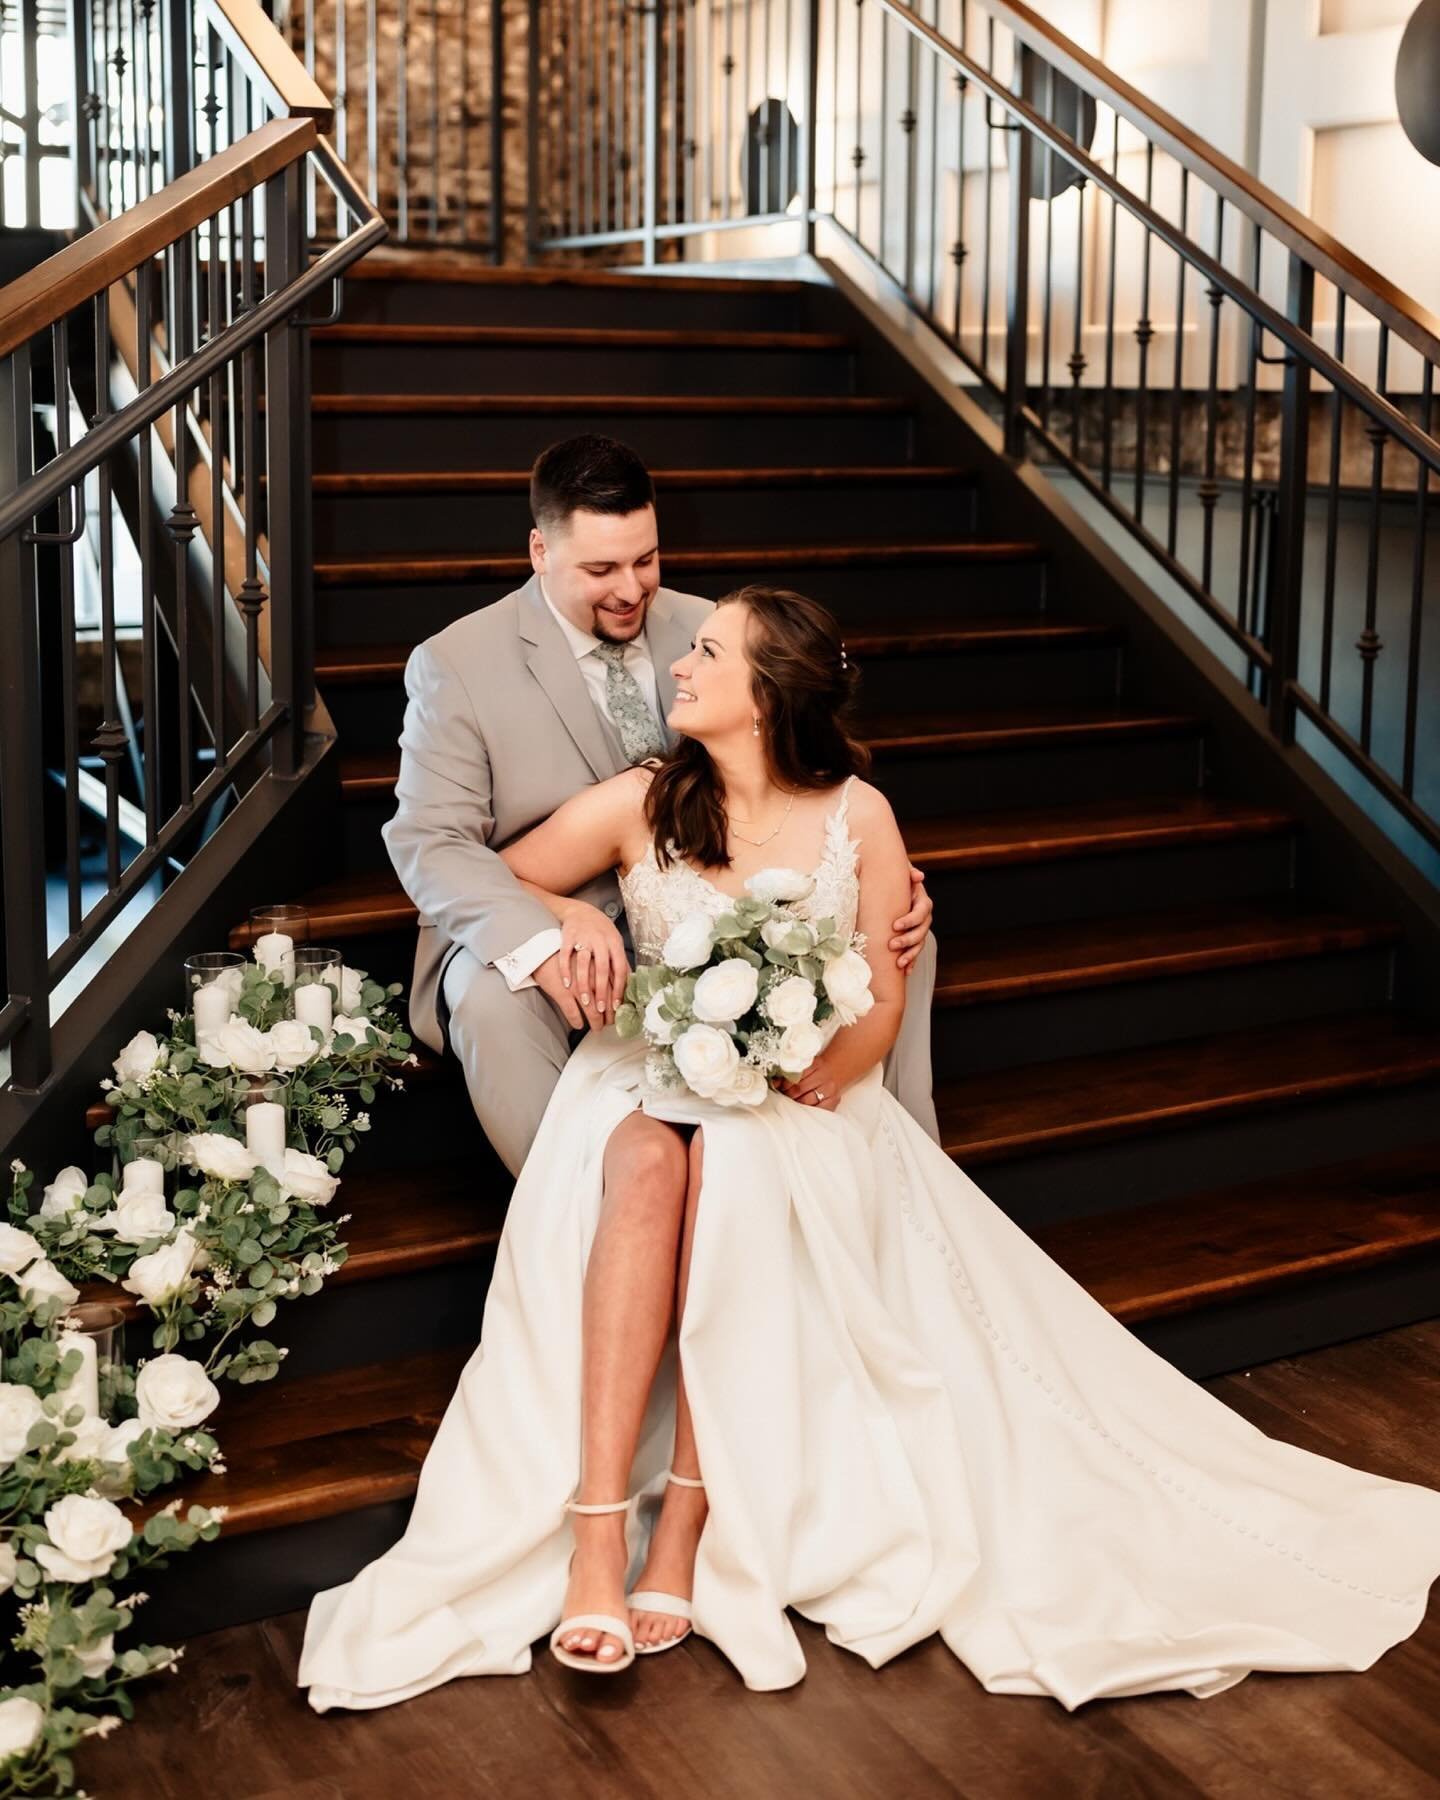 So many favorites from Justin and Mikayla&rsquo;s day! I can&rsquo;t wait to send this beauty home 🤍

Milwaukee Wedding Photographer
Milwaukee Wedding
Lake Geneva Wedding Photographer